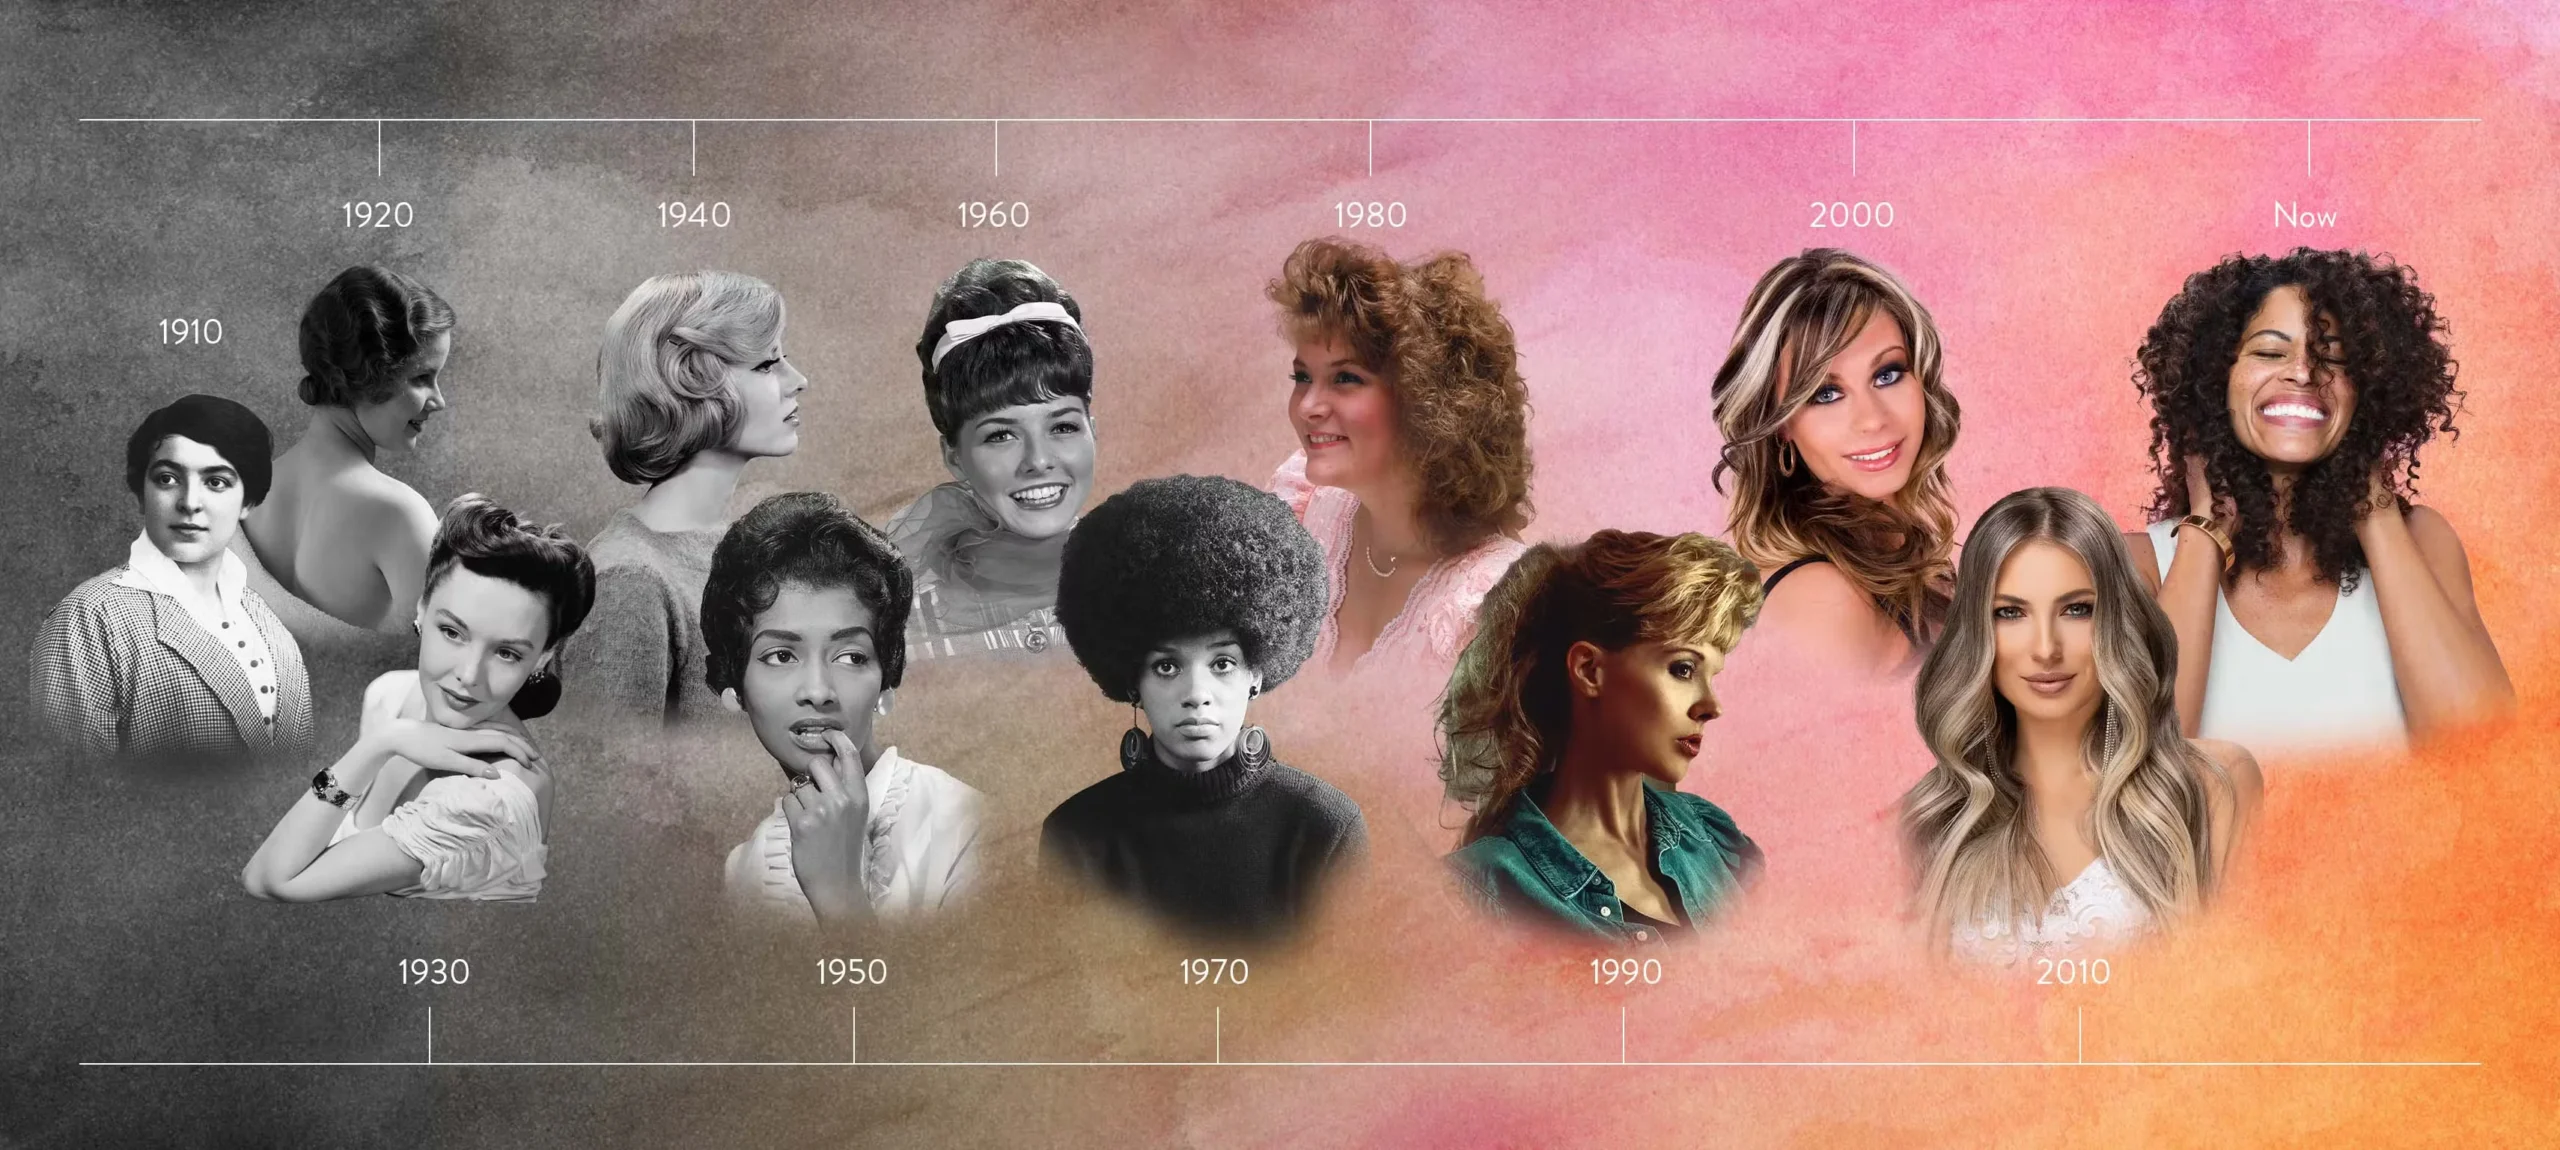 Evolution of Hairstyles Through the Ages